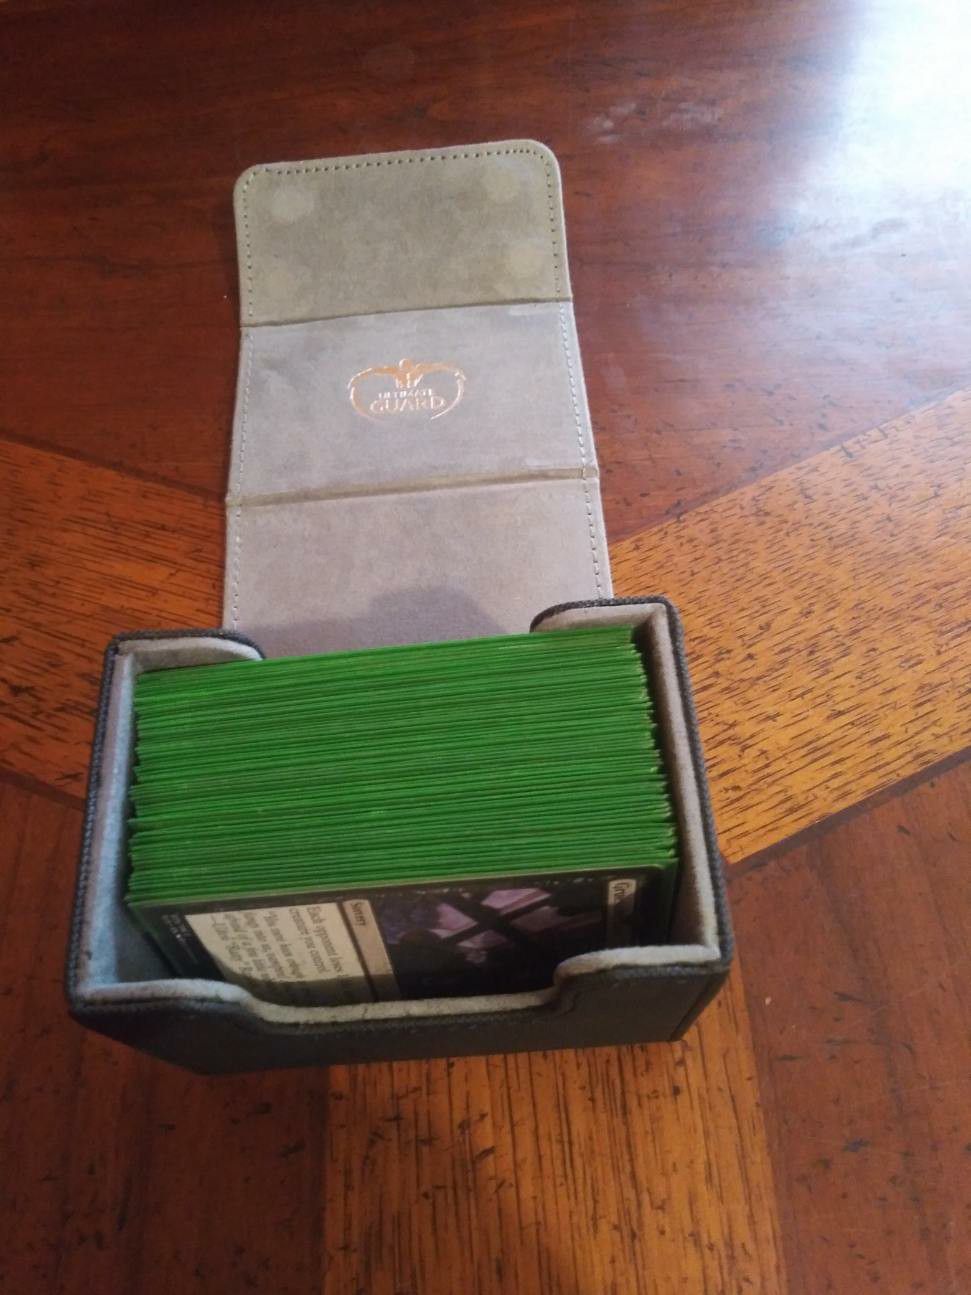 Magic cards all in great condition